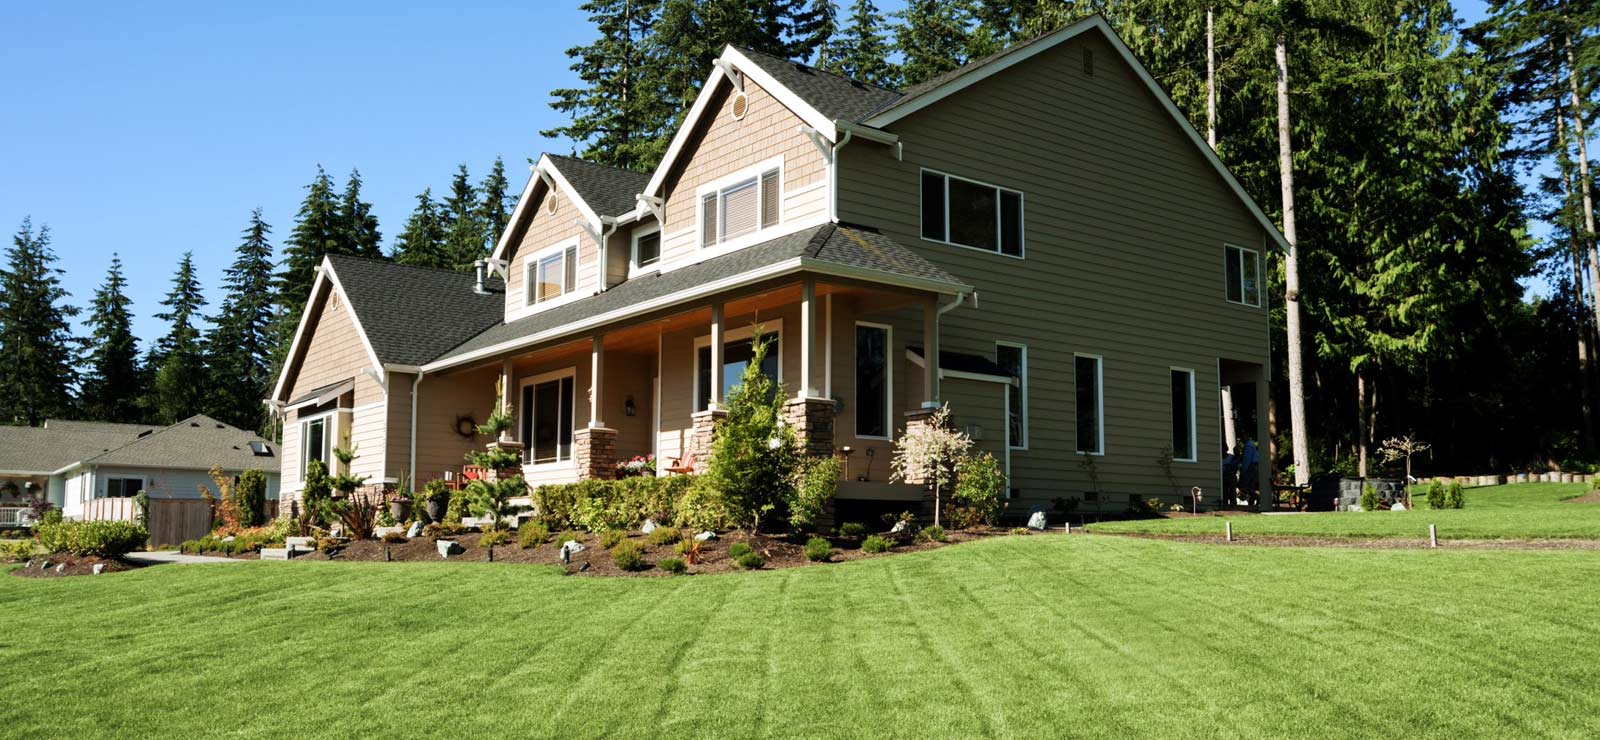 A picture of a nice house with a freshly mowed lawn